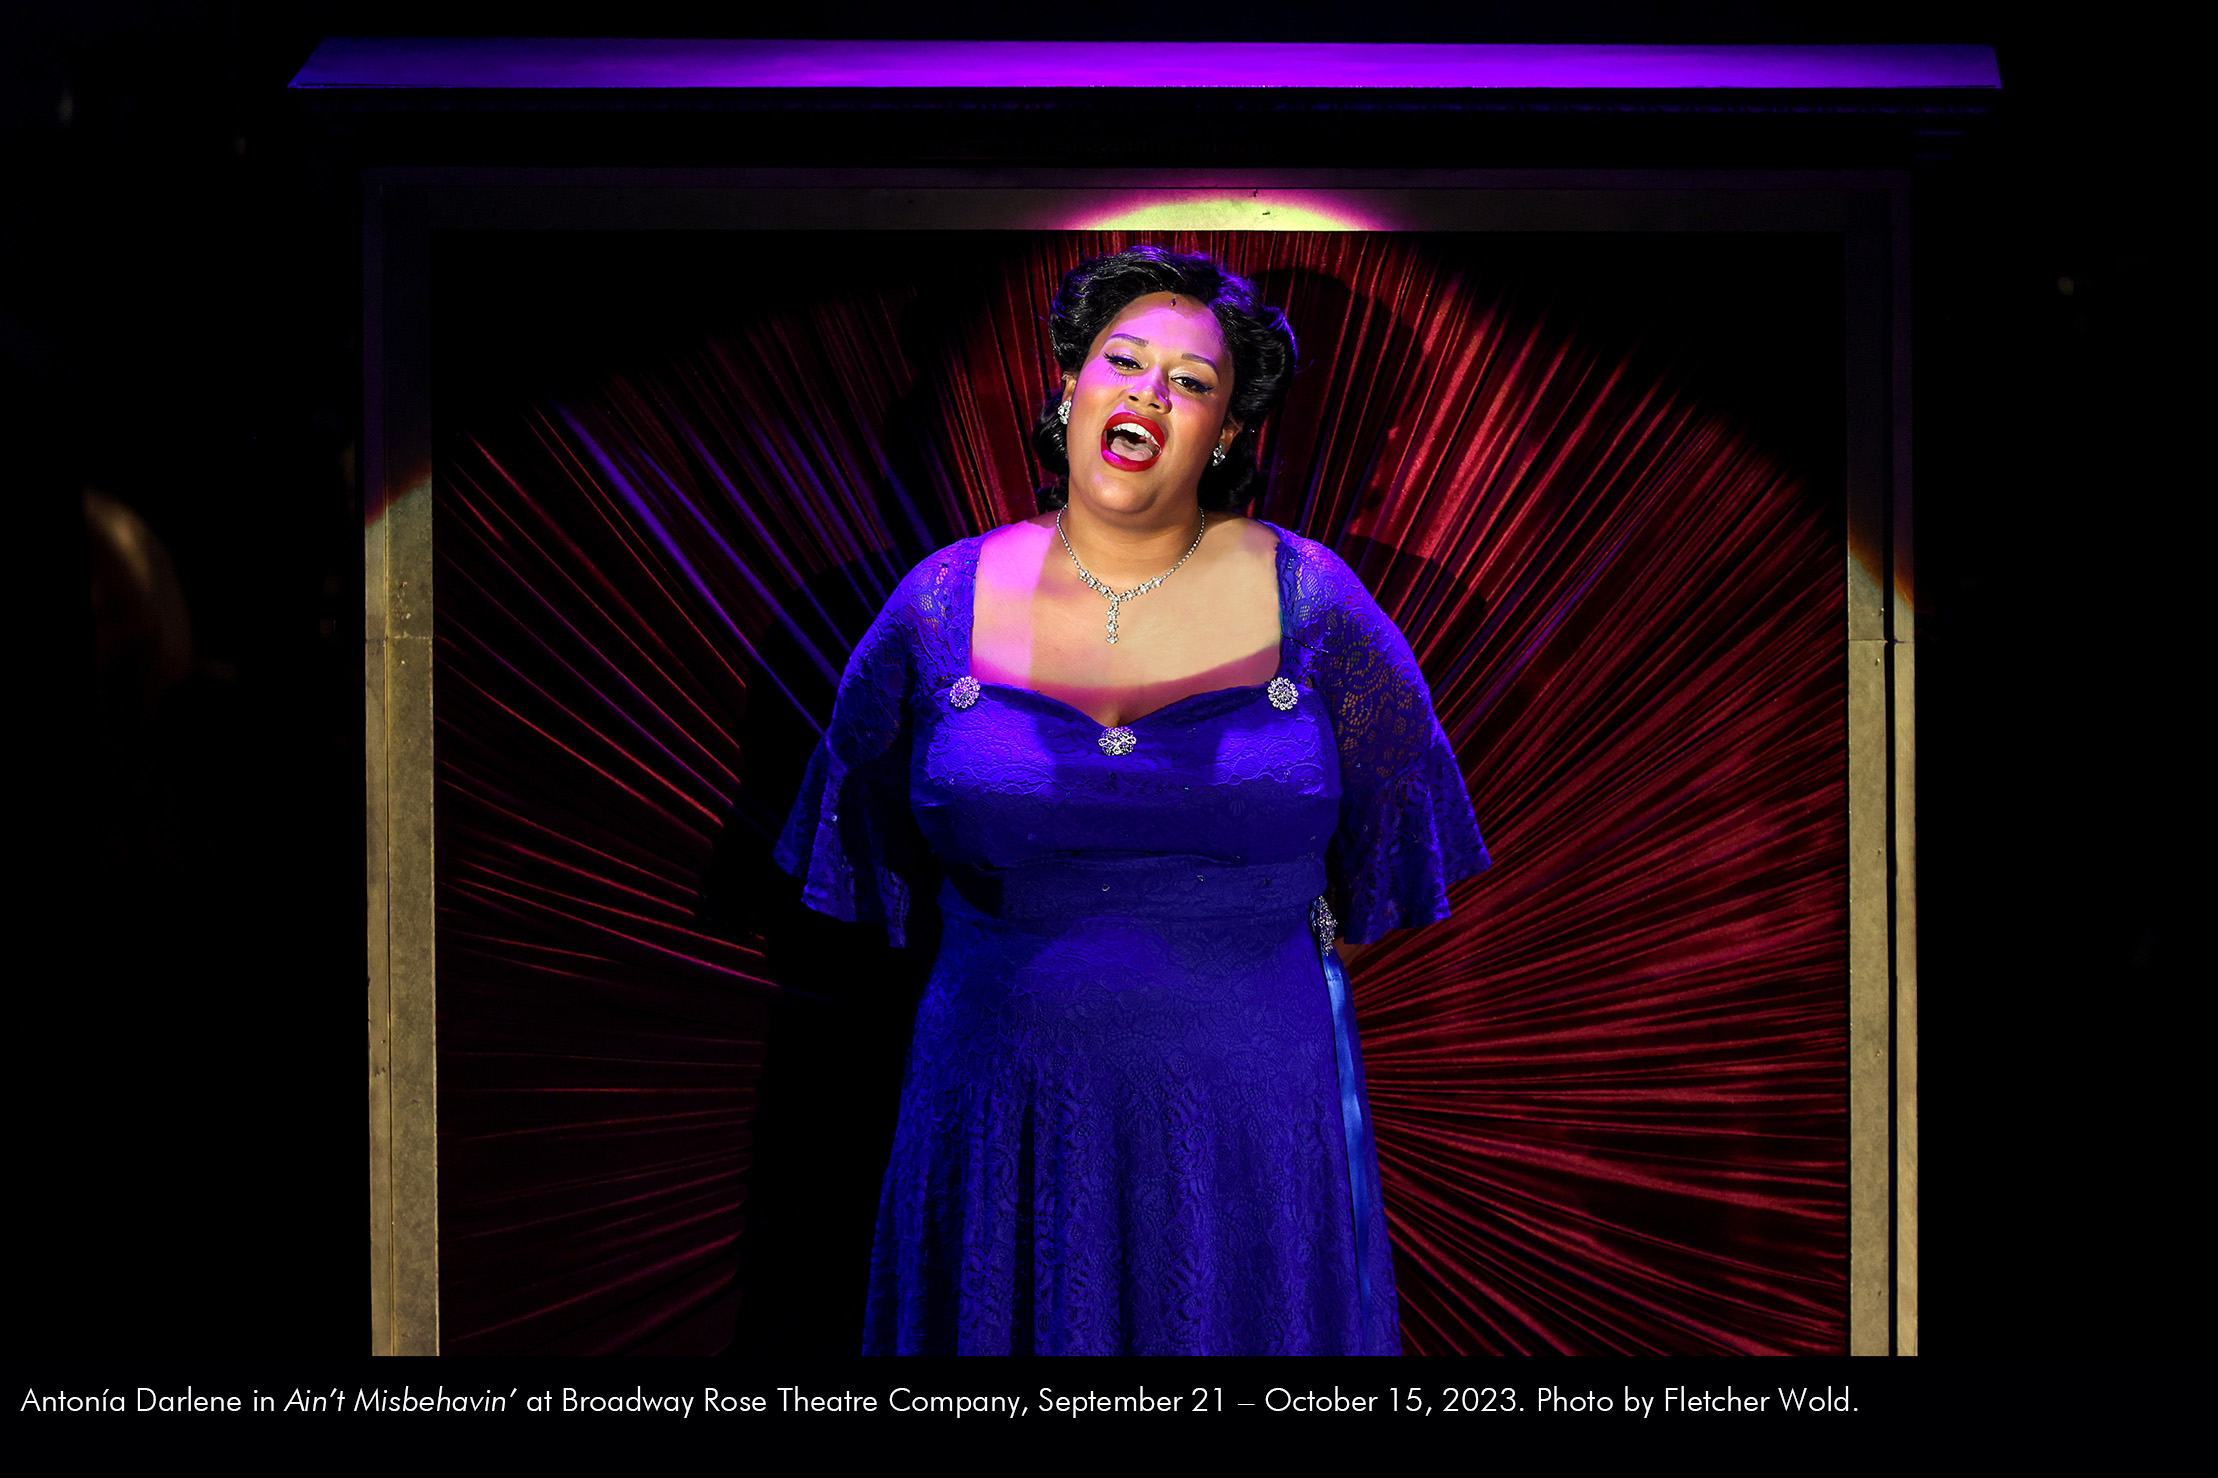 Antonía Darlene in Ain't Misbehavin' at Broadway Rose Theatre Company, September 21 - October 15, 2023. Photo by Fletcher Wold.